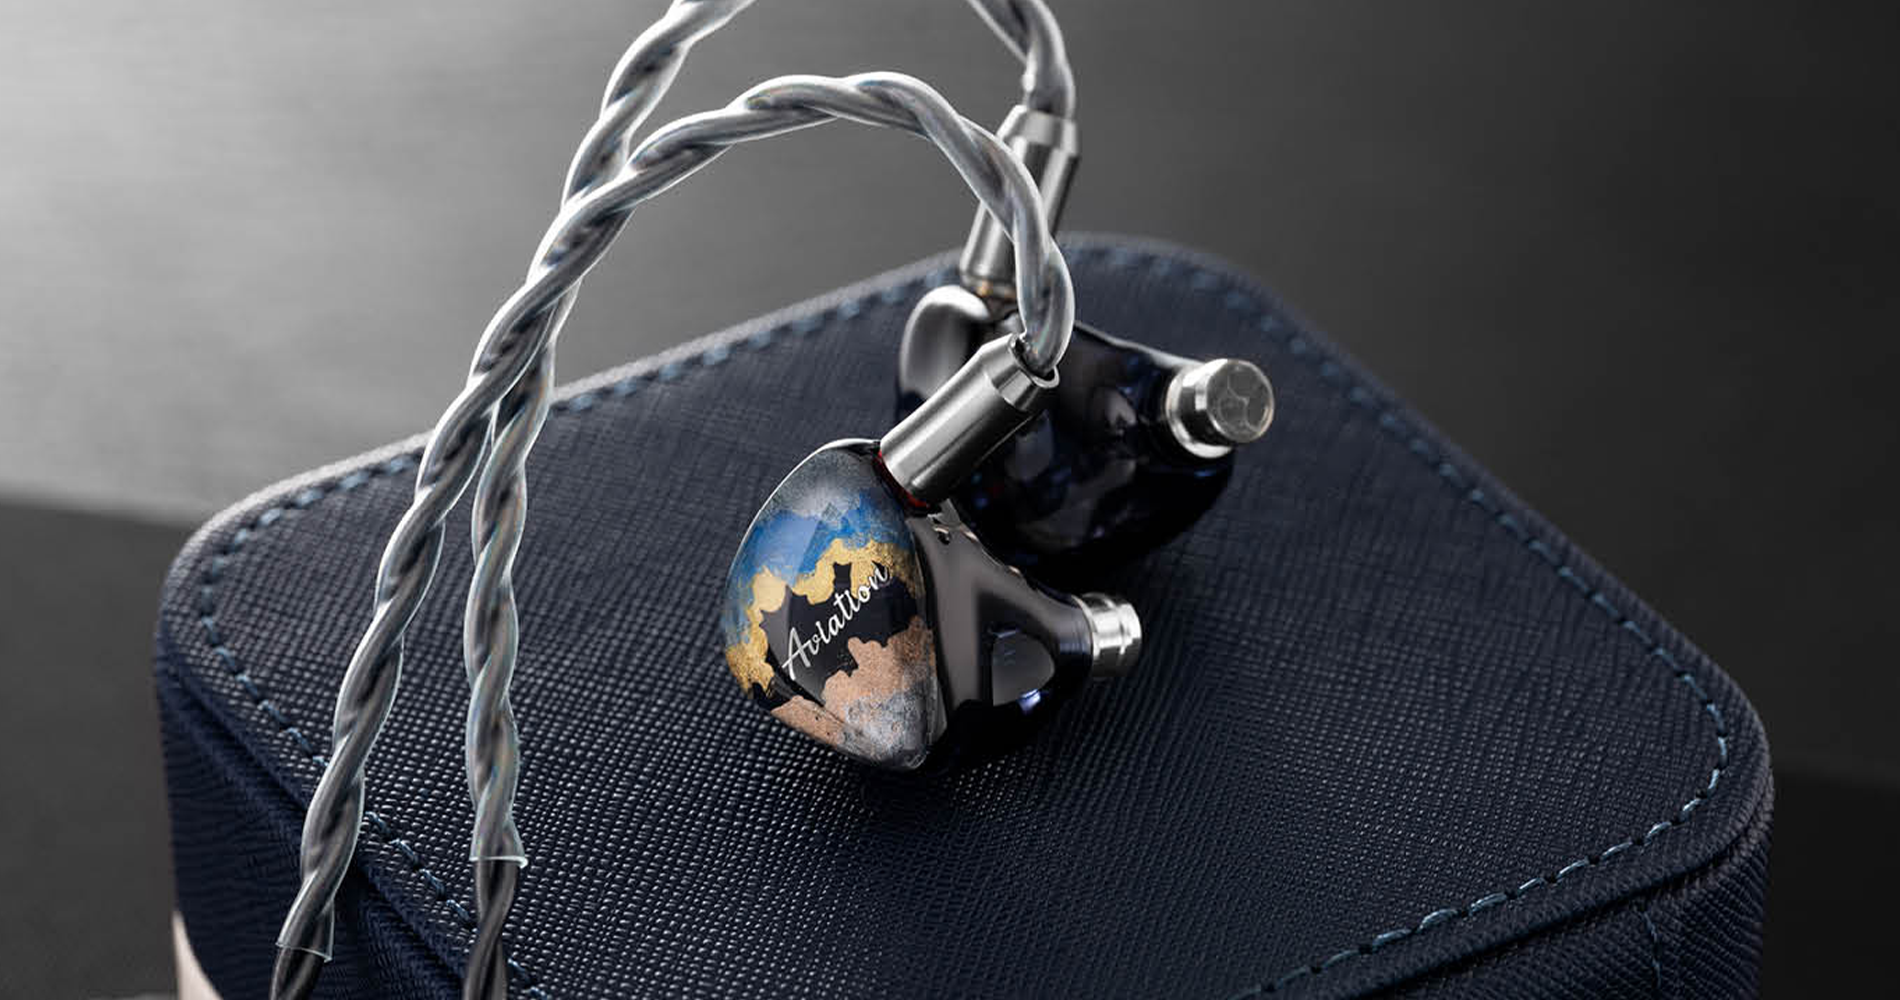 Queen of Audio Aviation In-Ear Monitors Overview